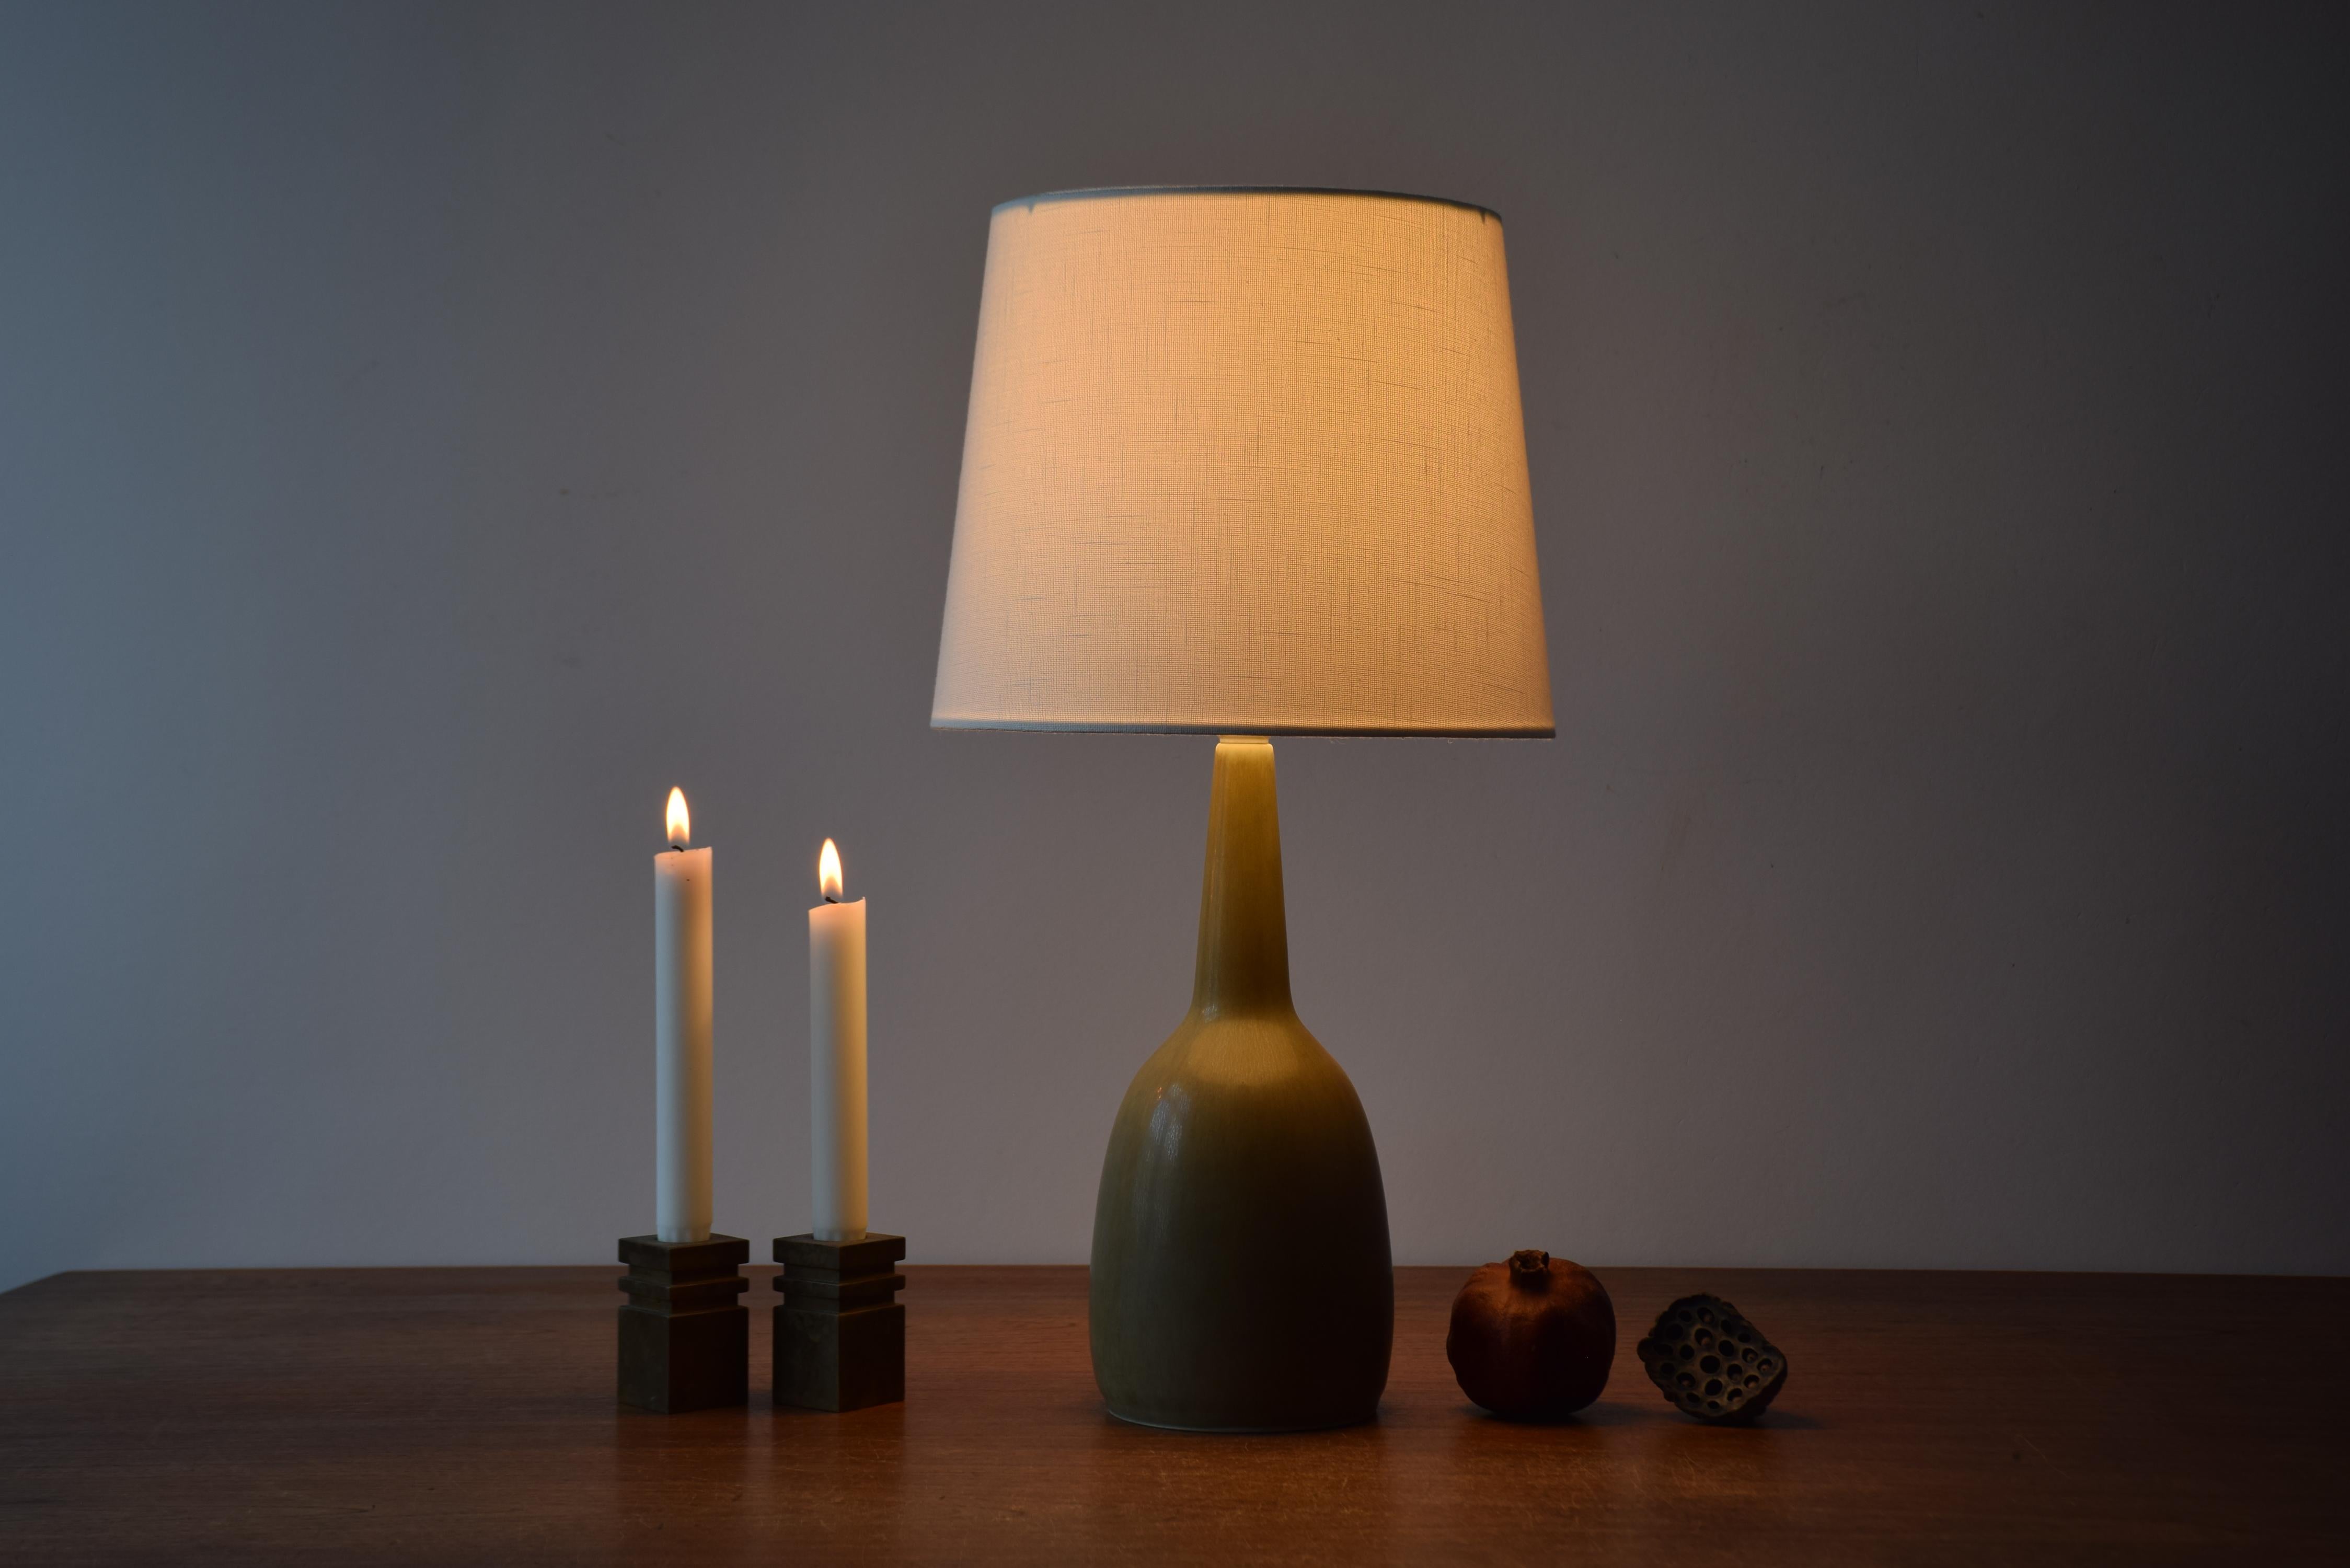 Midcentury table lamp from Danish Palshus with pale yellow haresfur glaze.
The lamp was designed by Per Linnemann-Schmidt and produced, circa 1950s.

Included is a new lampshade designed in Denmark. It is made of woven fabric with some texture and